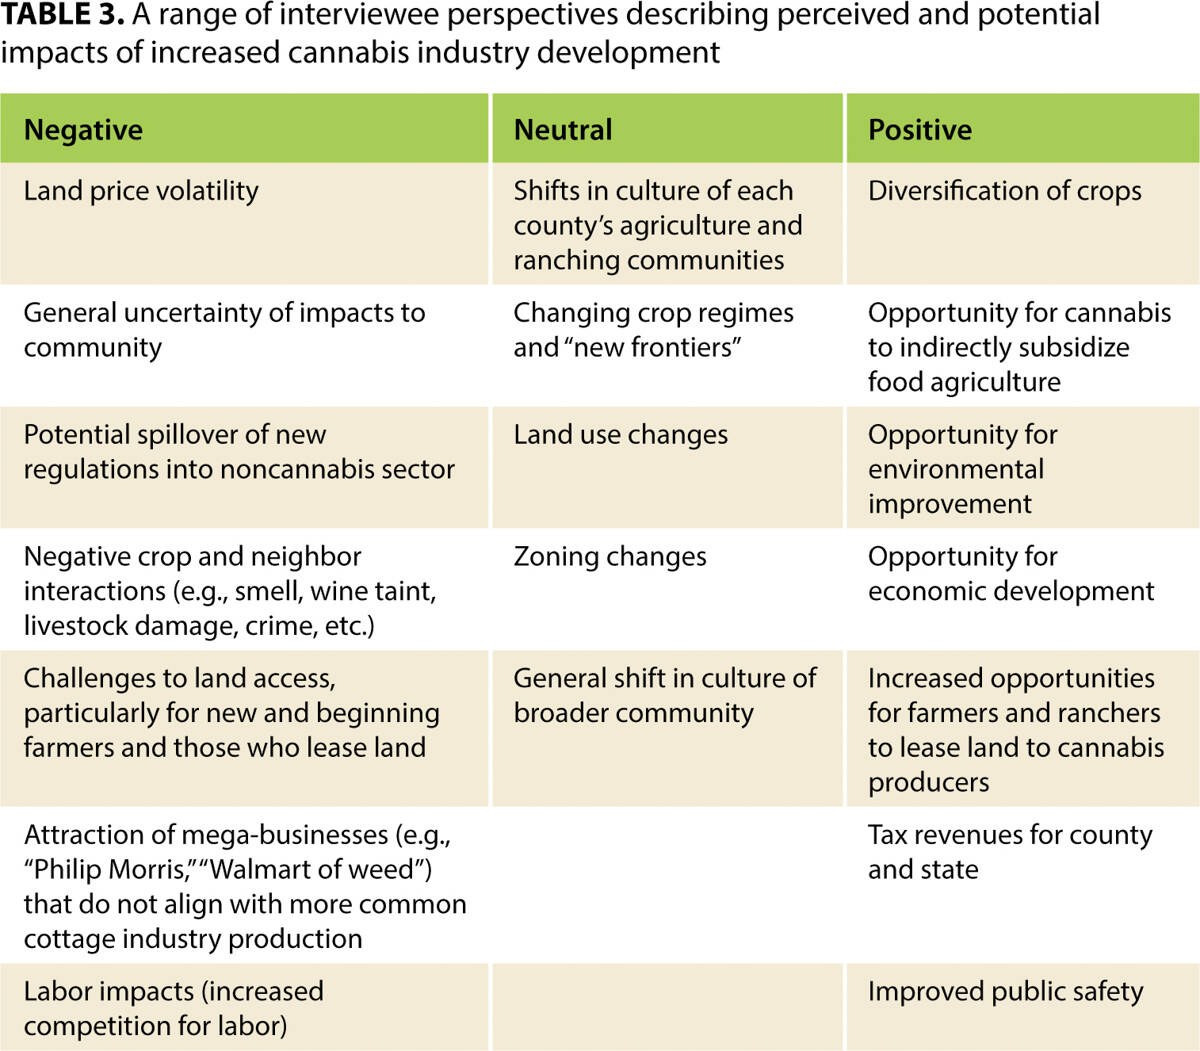 A range of interviewee perspectives describing perceived and potential impacts of increased cannabis industry development